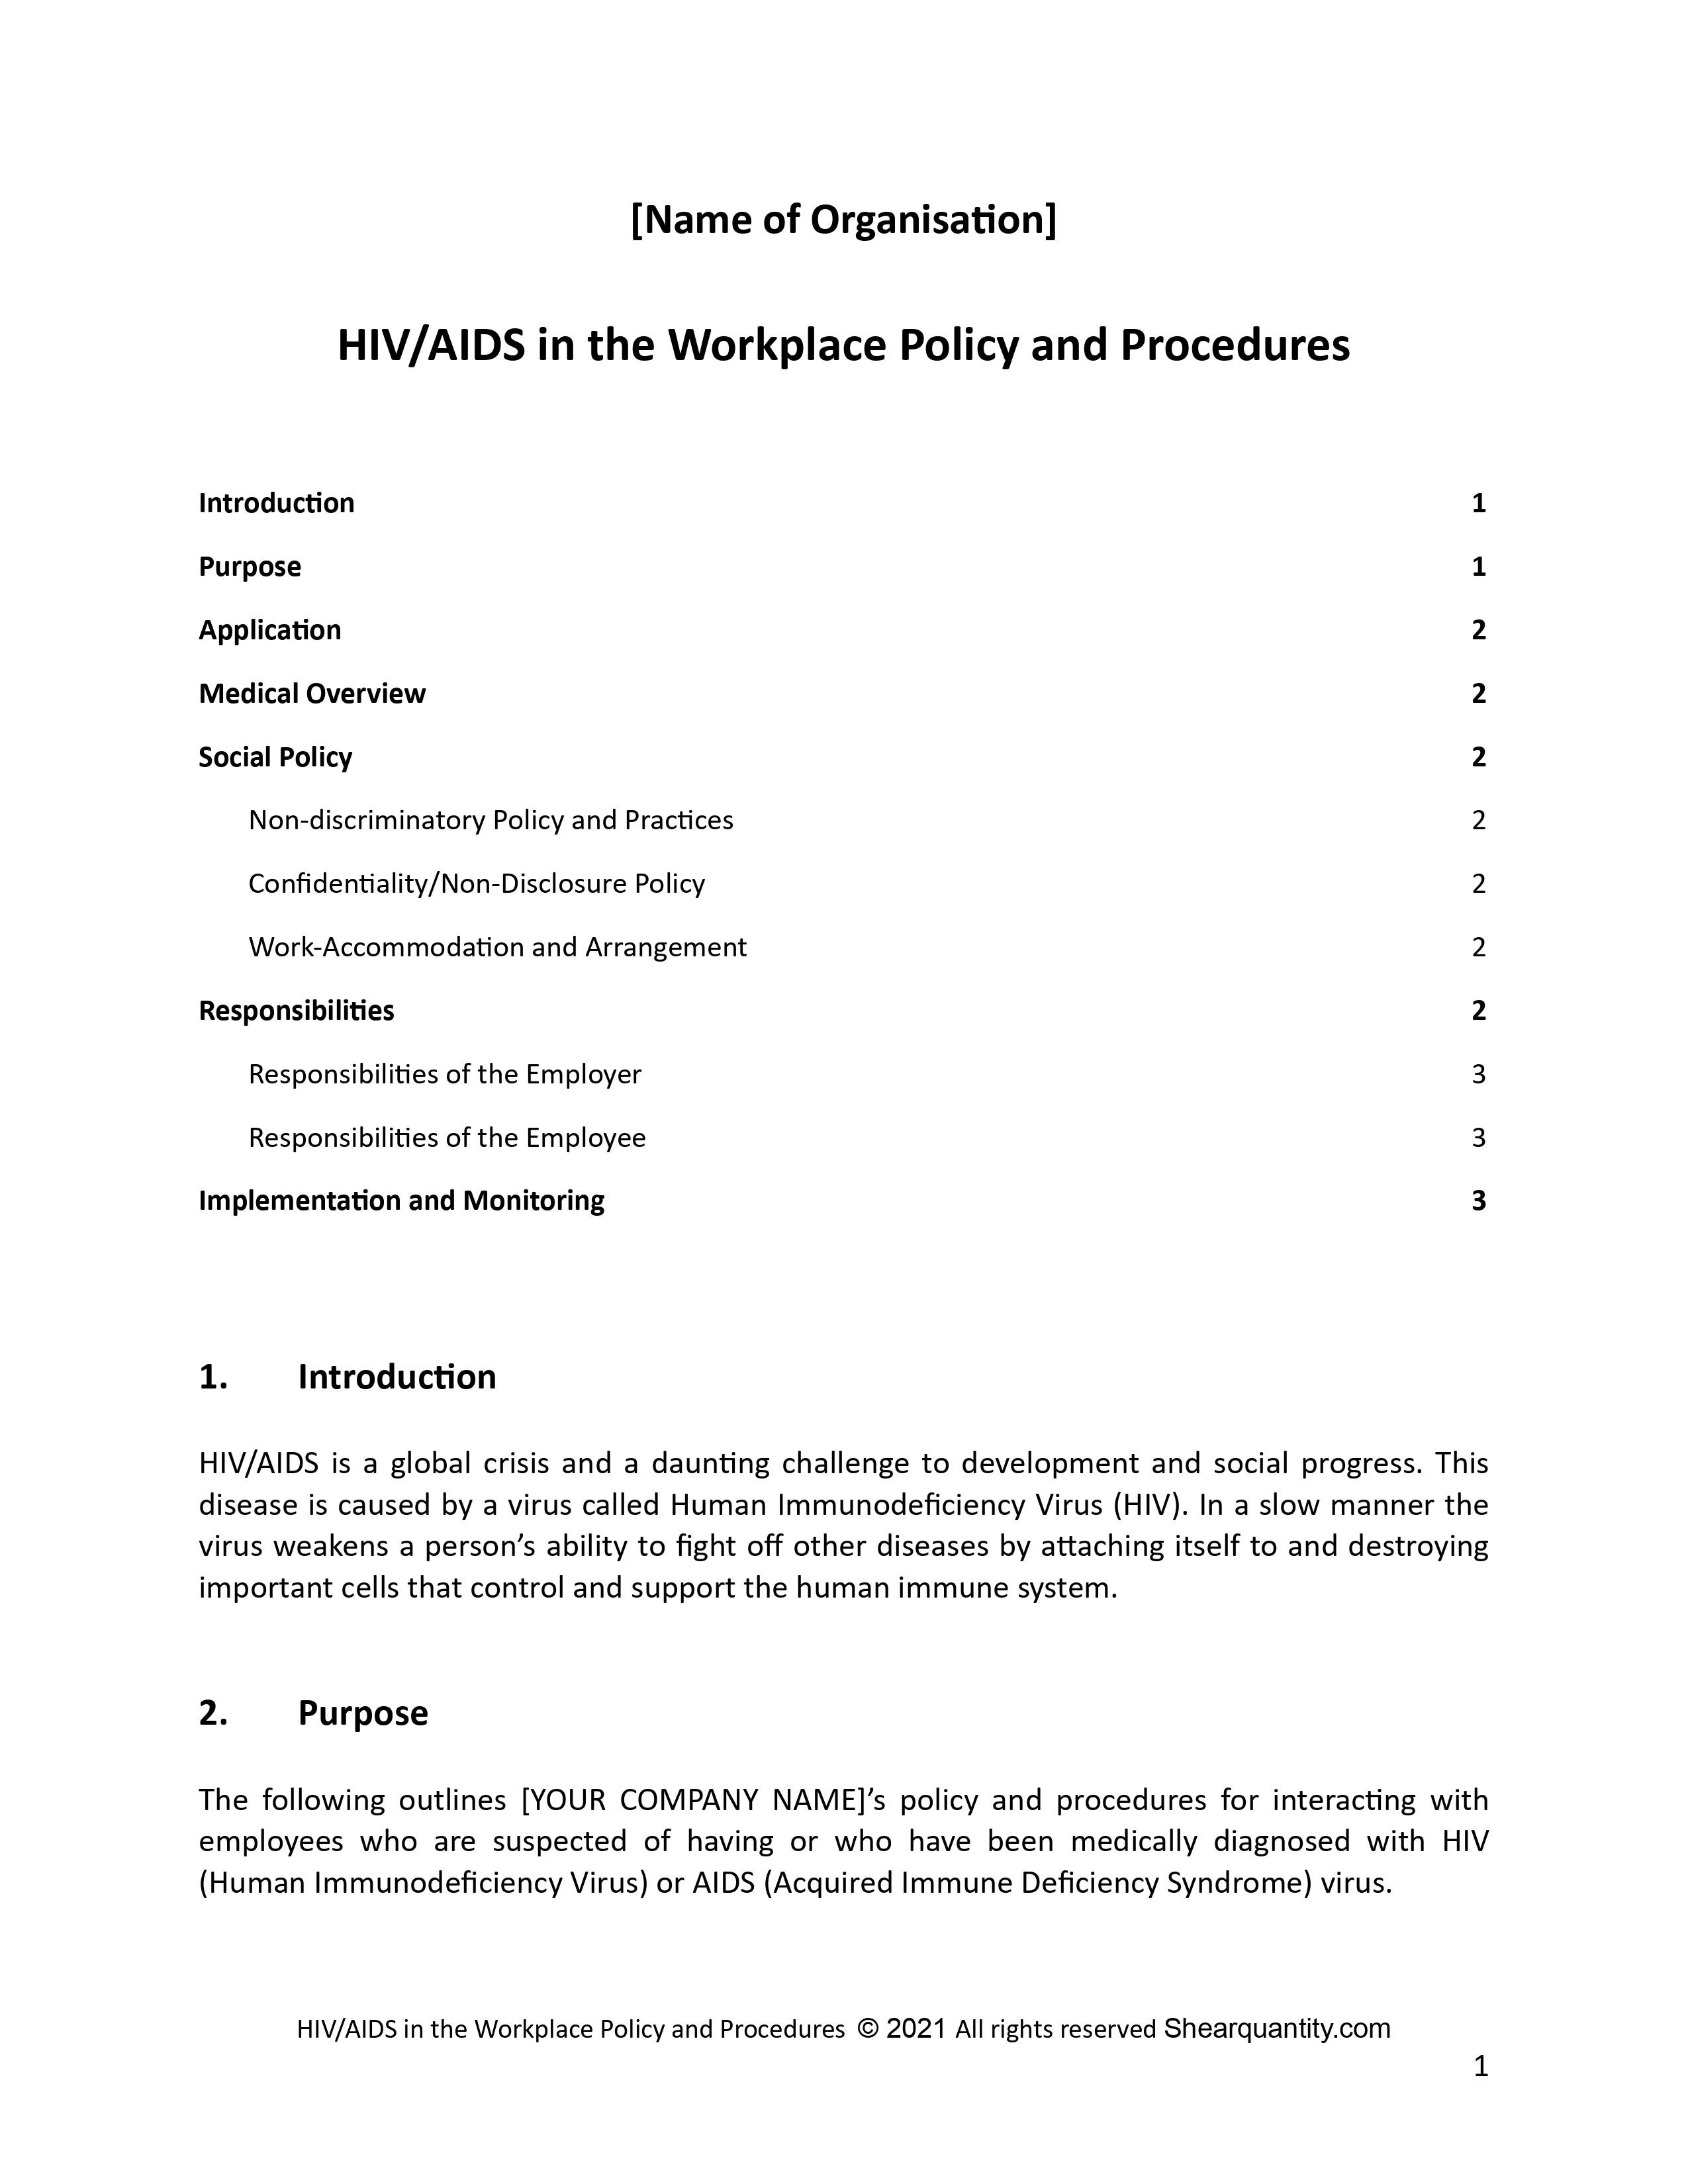 HIV/AIDS in the Workplace Policy and Procedures